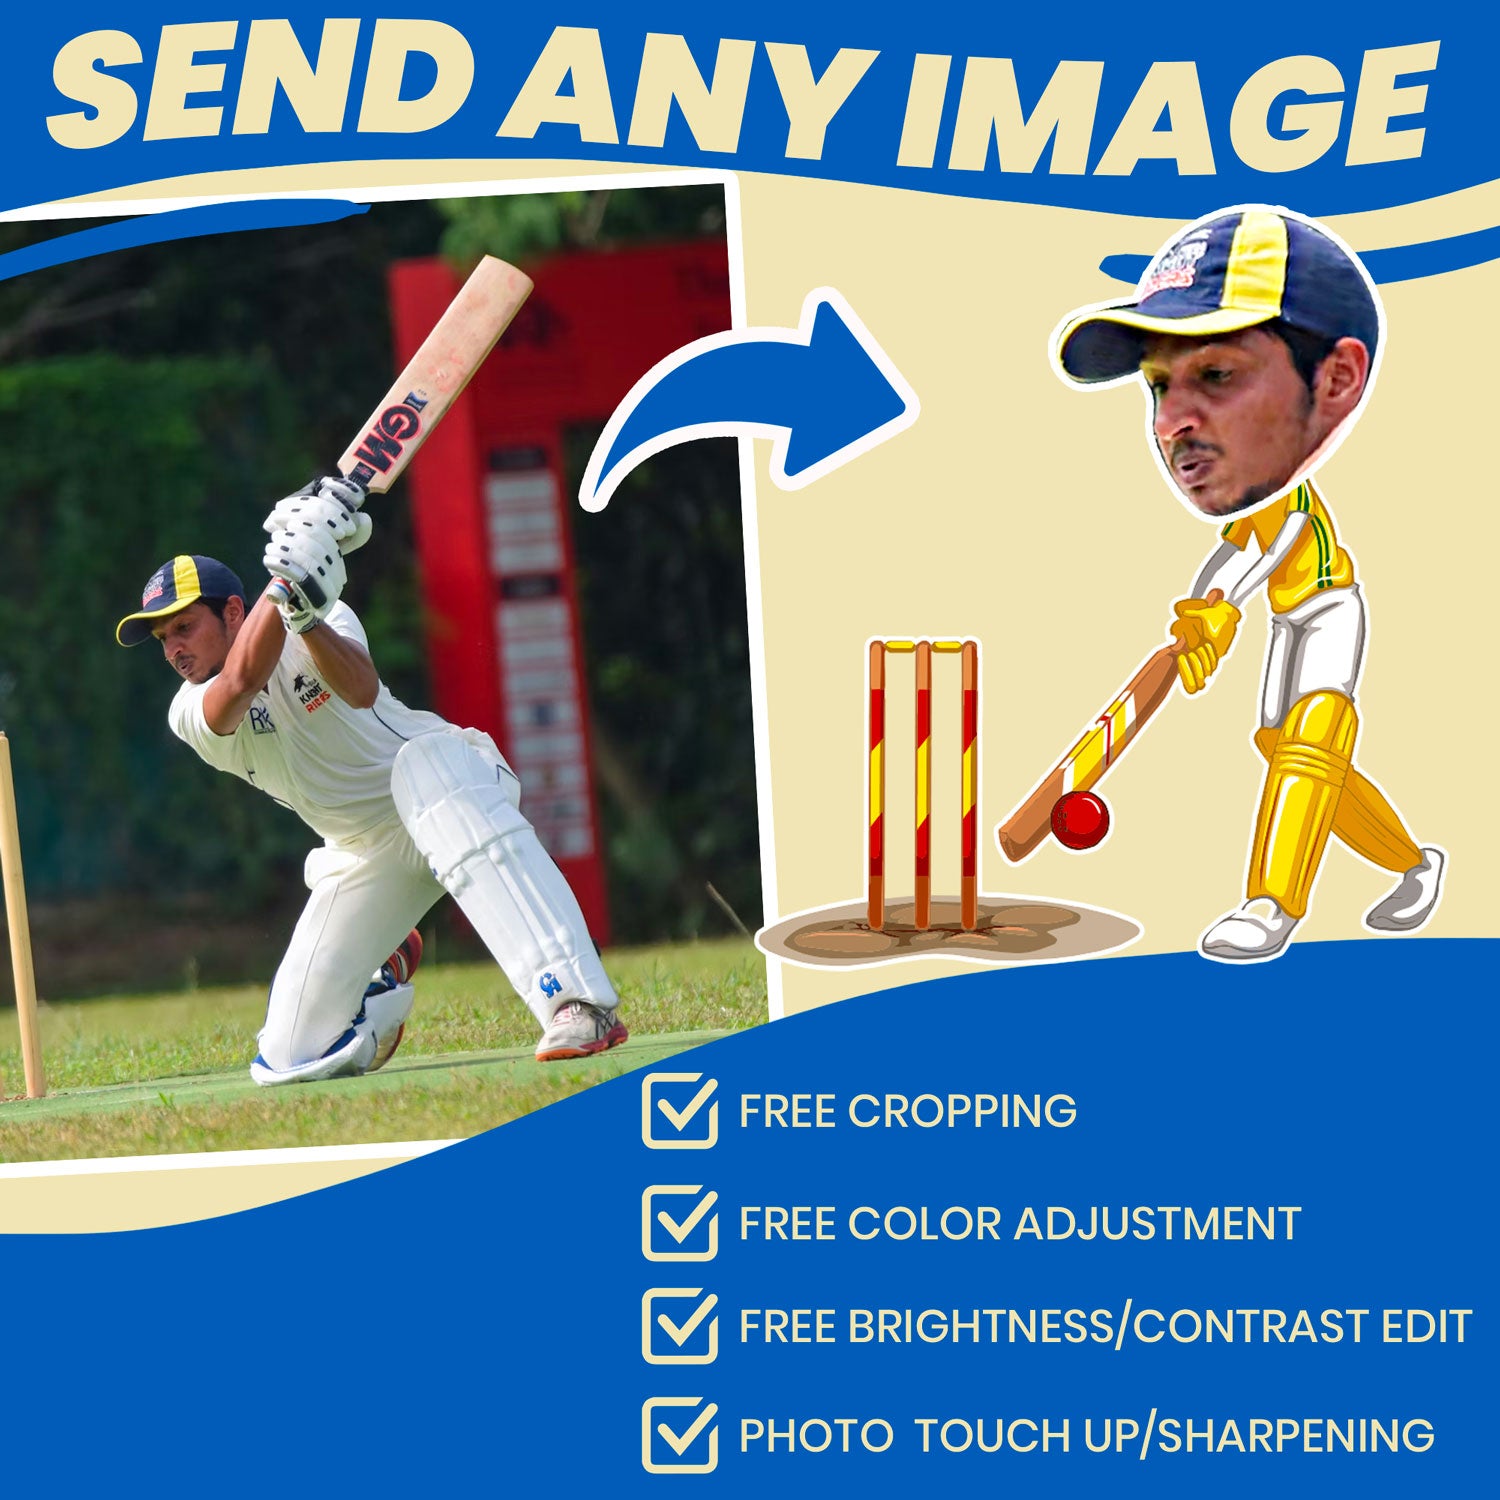 personalized cricket gift socks for team and coach instructions on how to send any photo to be decorated as cricket players